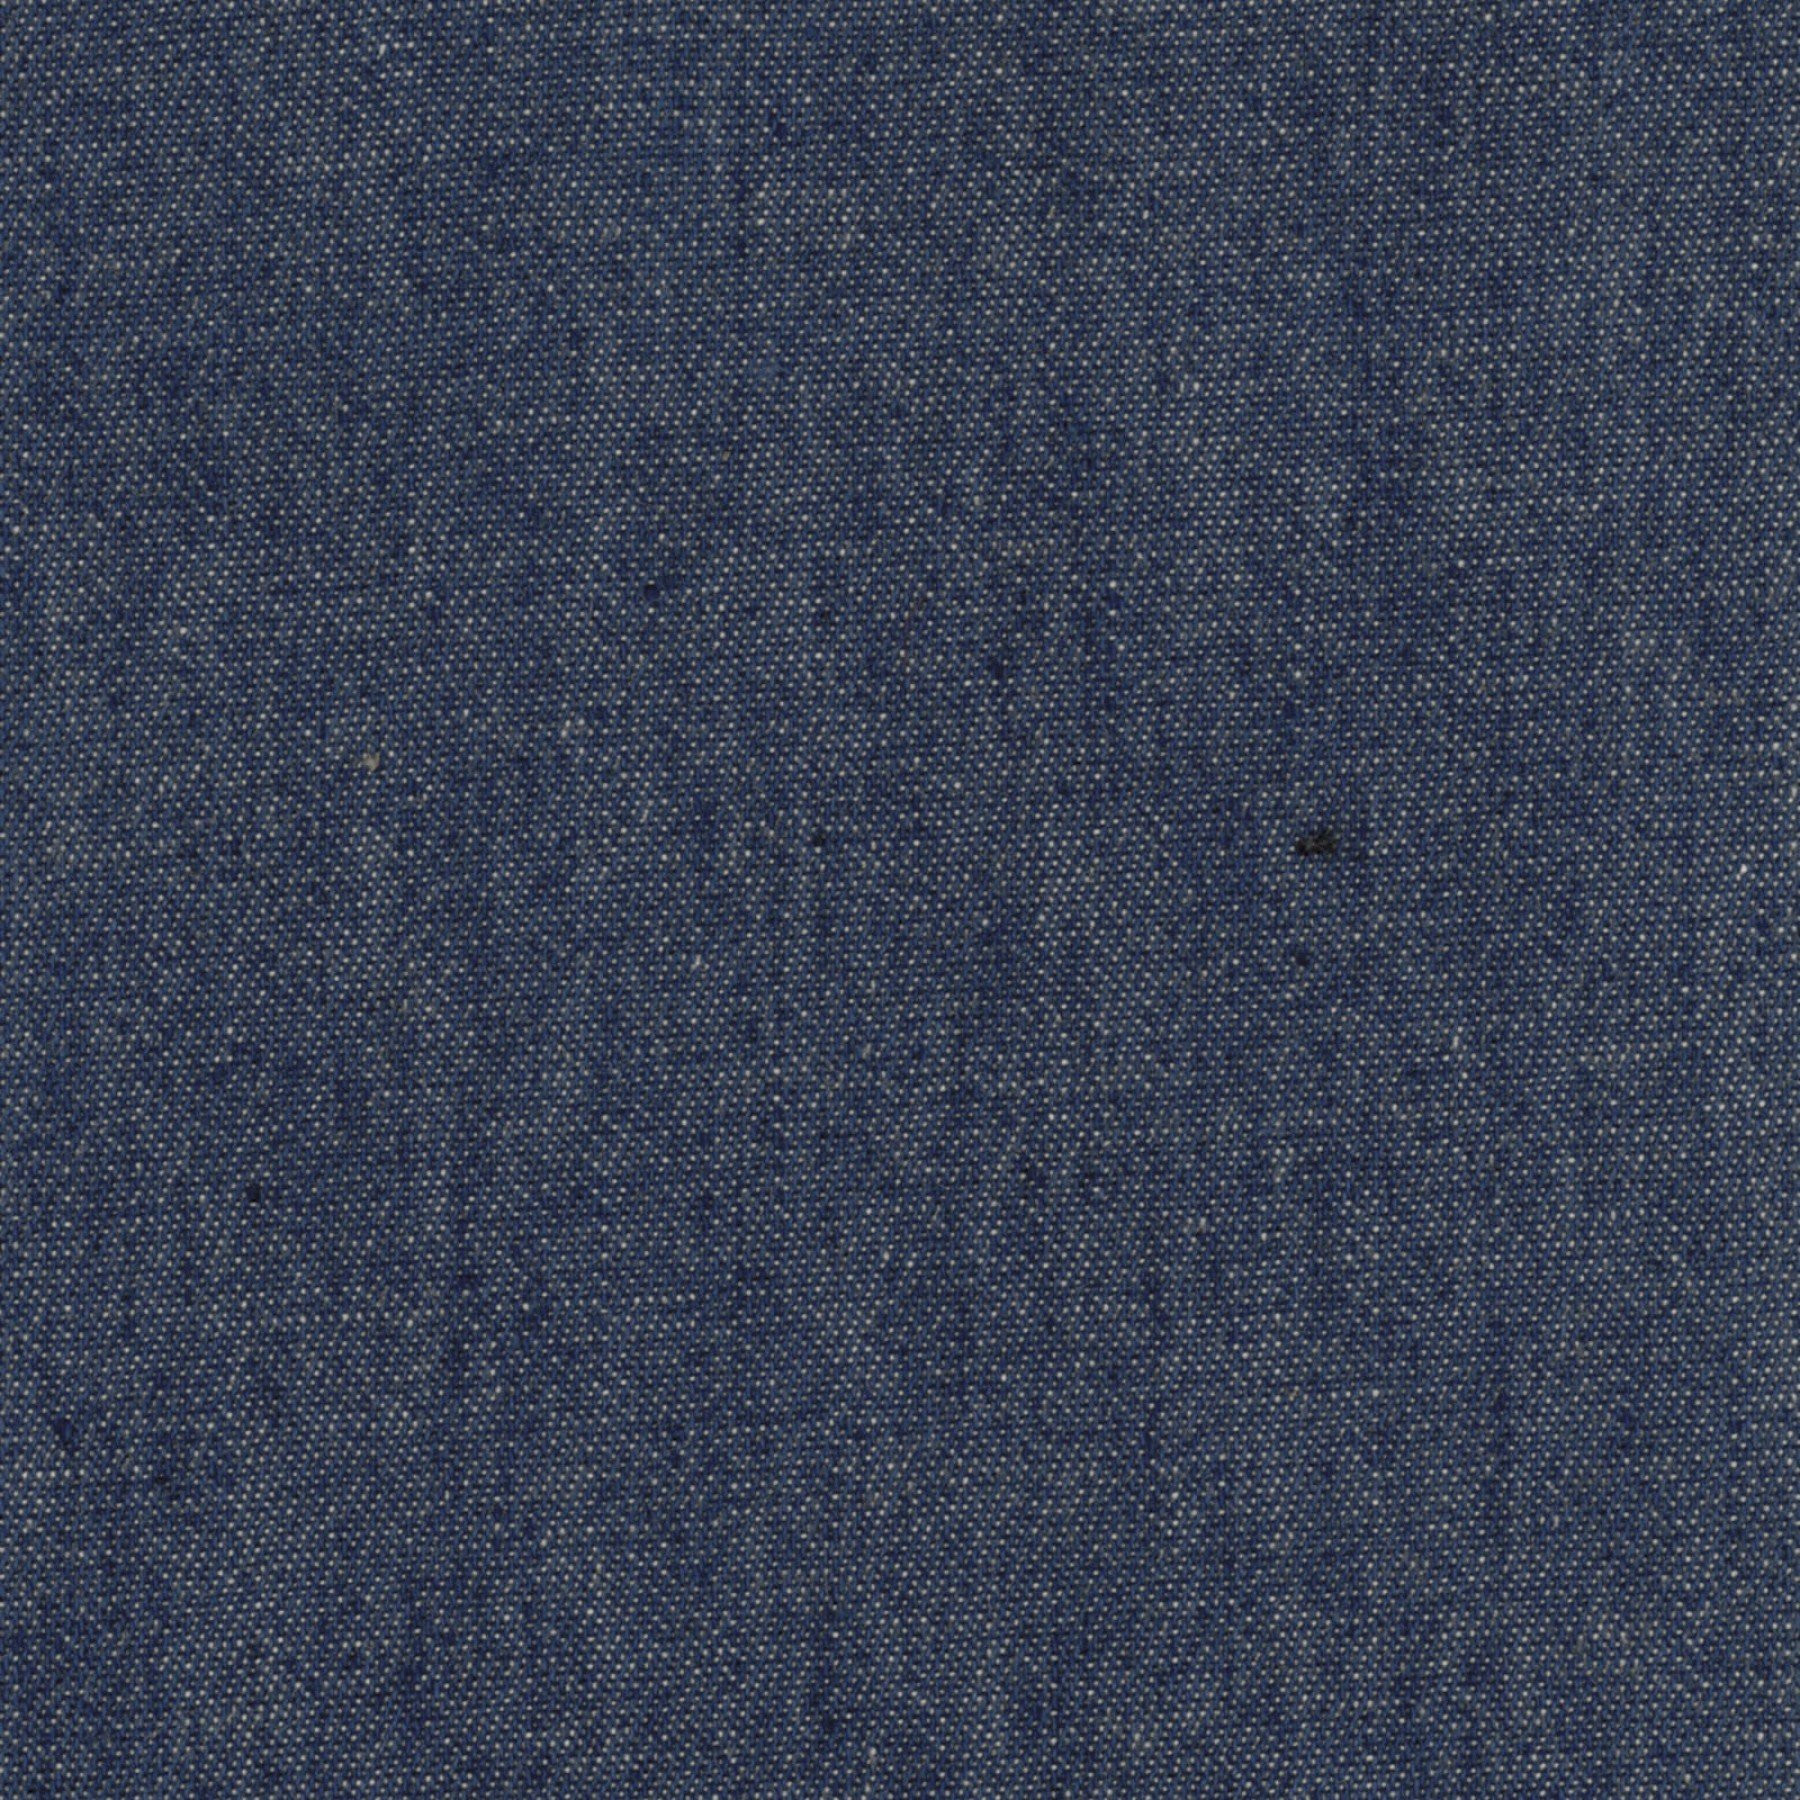 Indigo Blue 4.8 oz 100% Cotton Denim Chambray Fabric,56 Inches Wide, by The  Yard : Amazon.in: Home & Kitchen